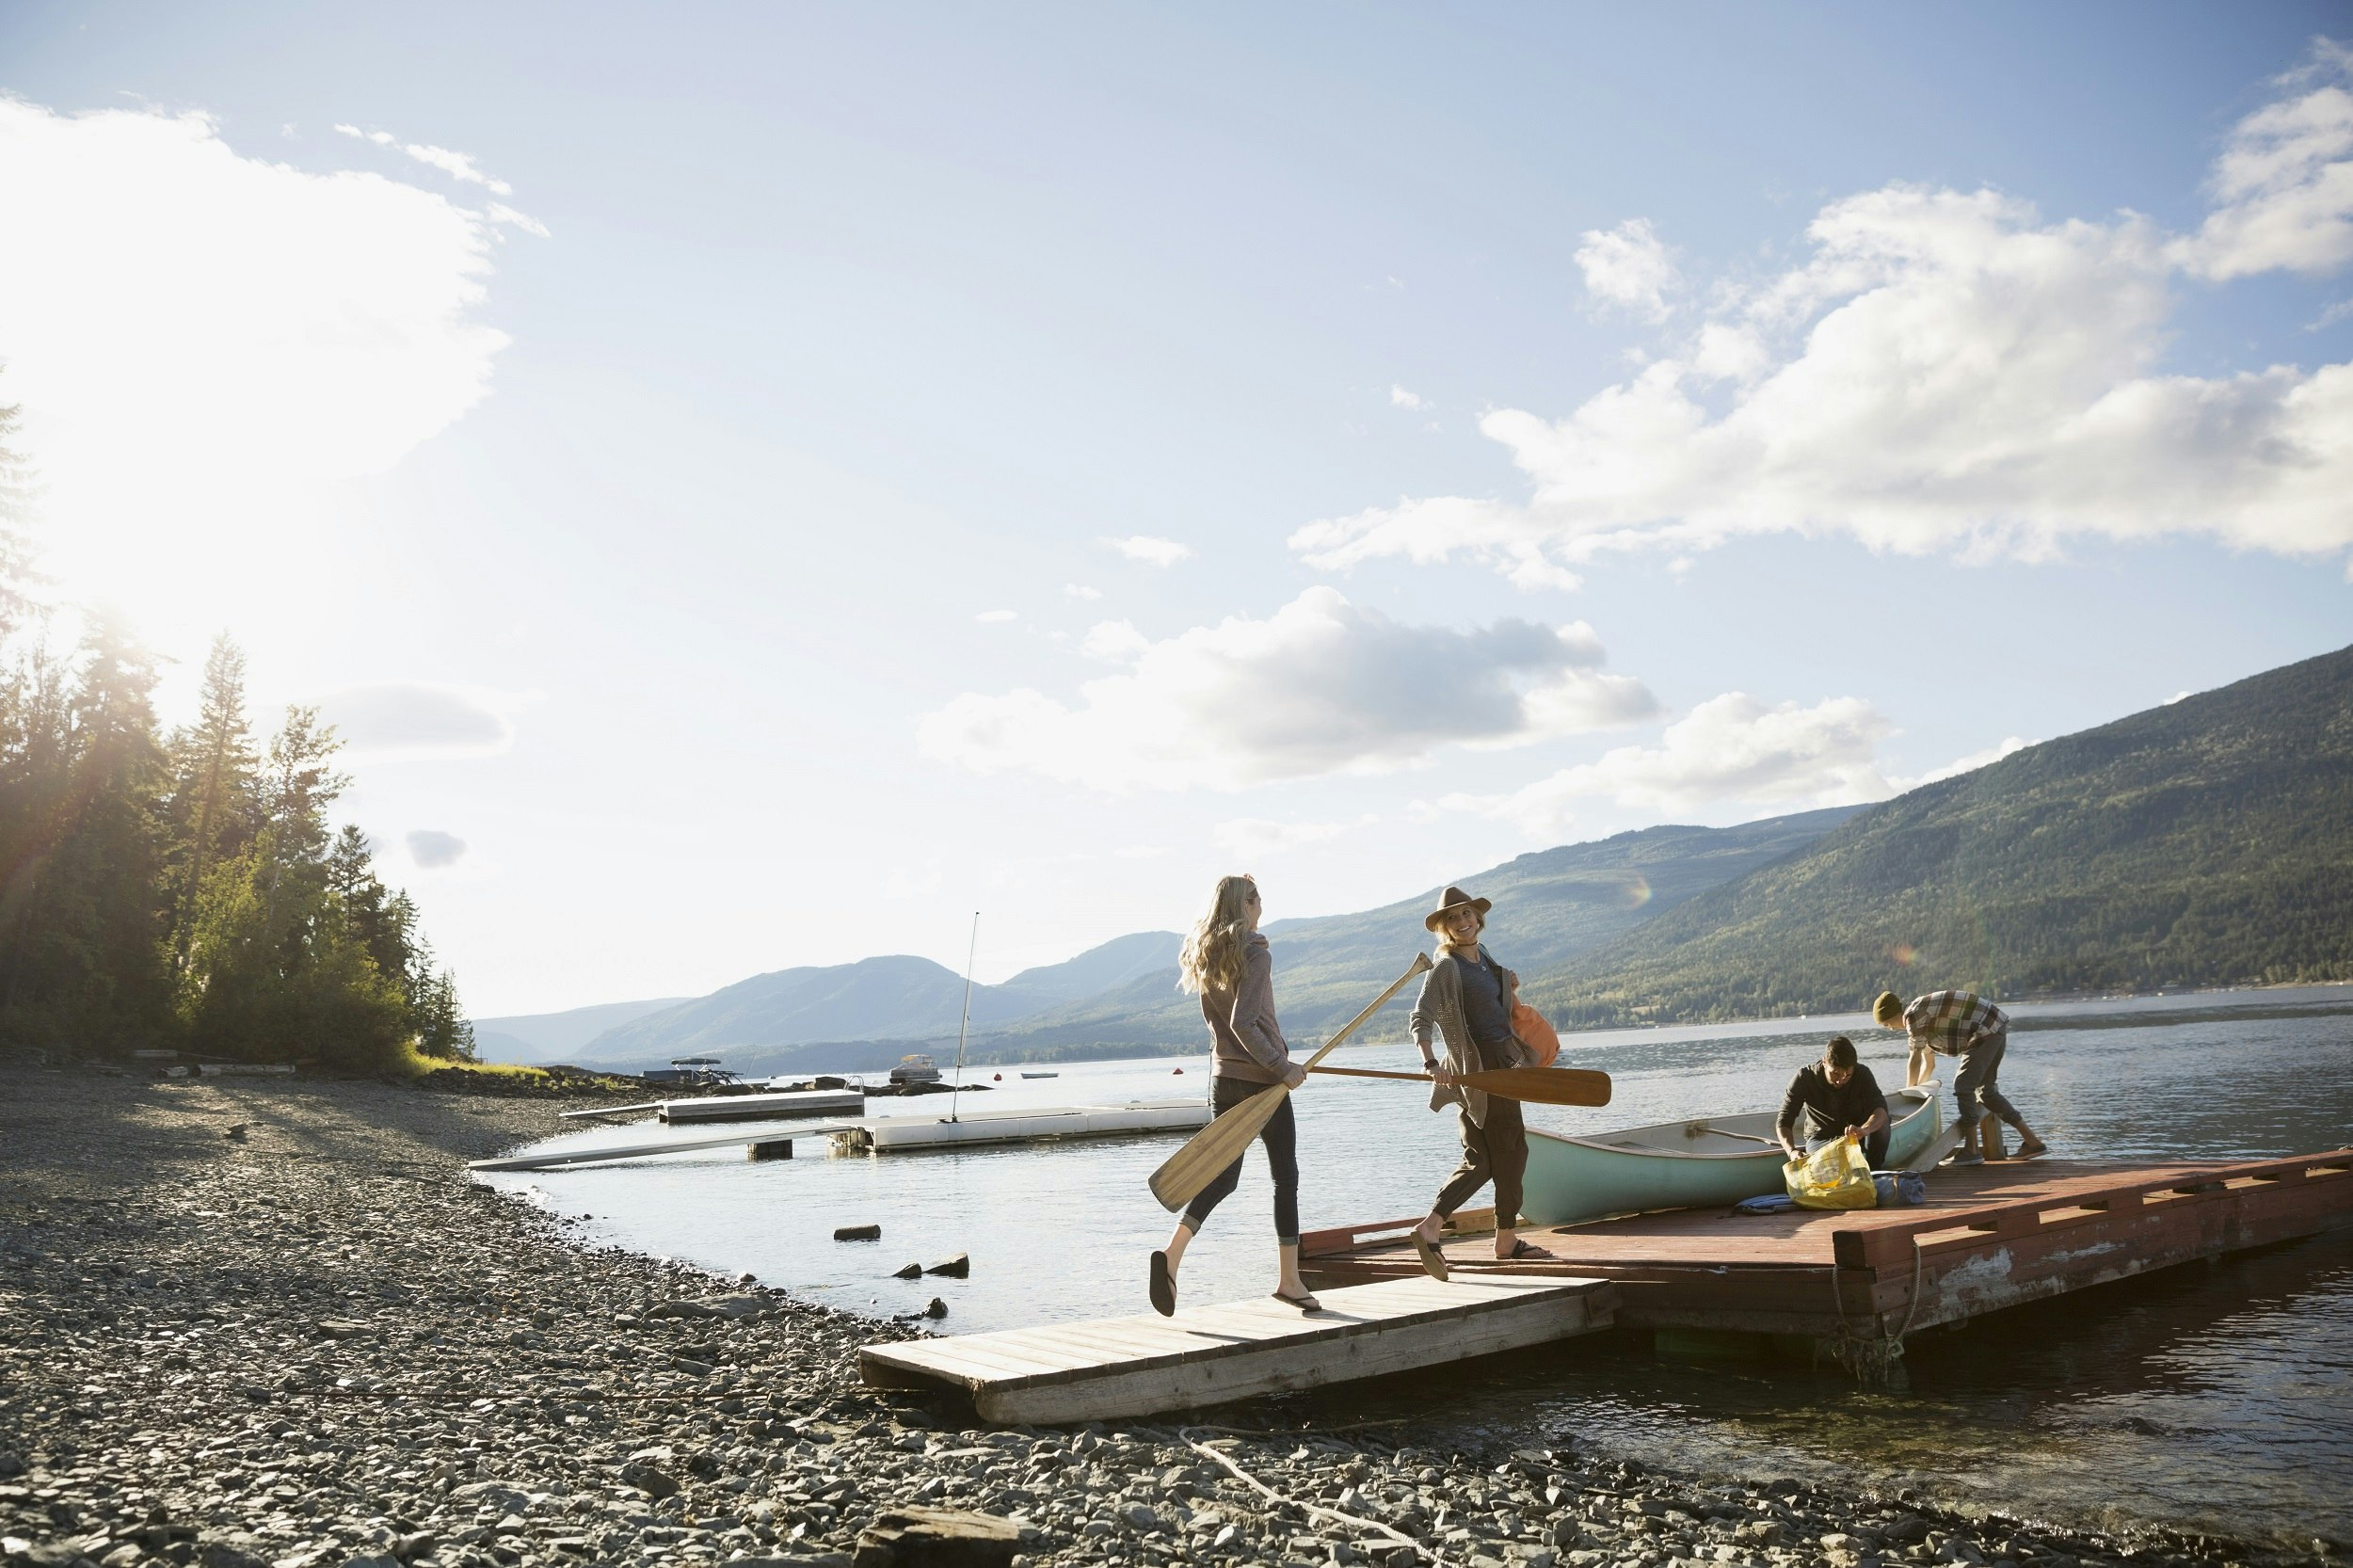 Two people carrying paddles walk onto a dock where two others are loading a canoe with supplies; the dock is off a rocky beach, and the lake is calm, with forested hills in the background.